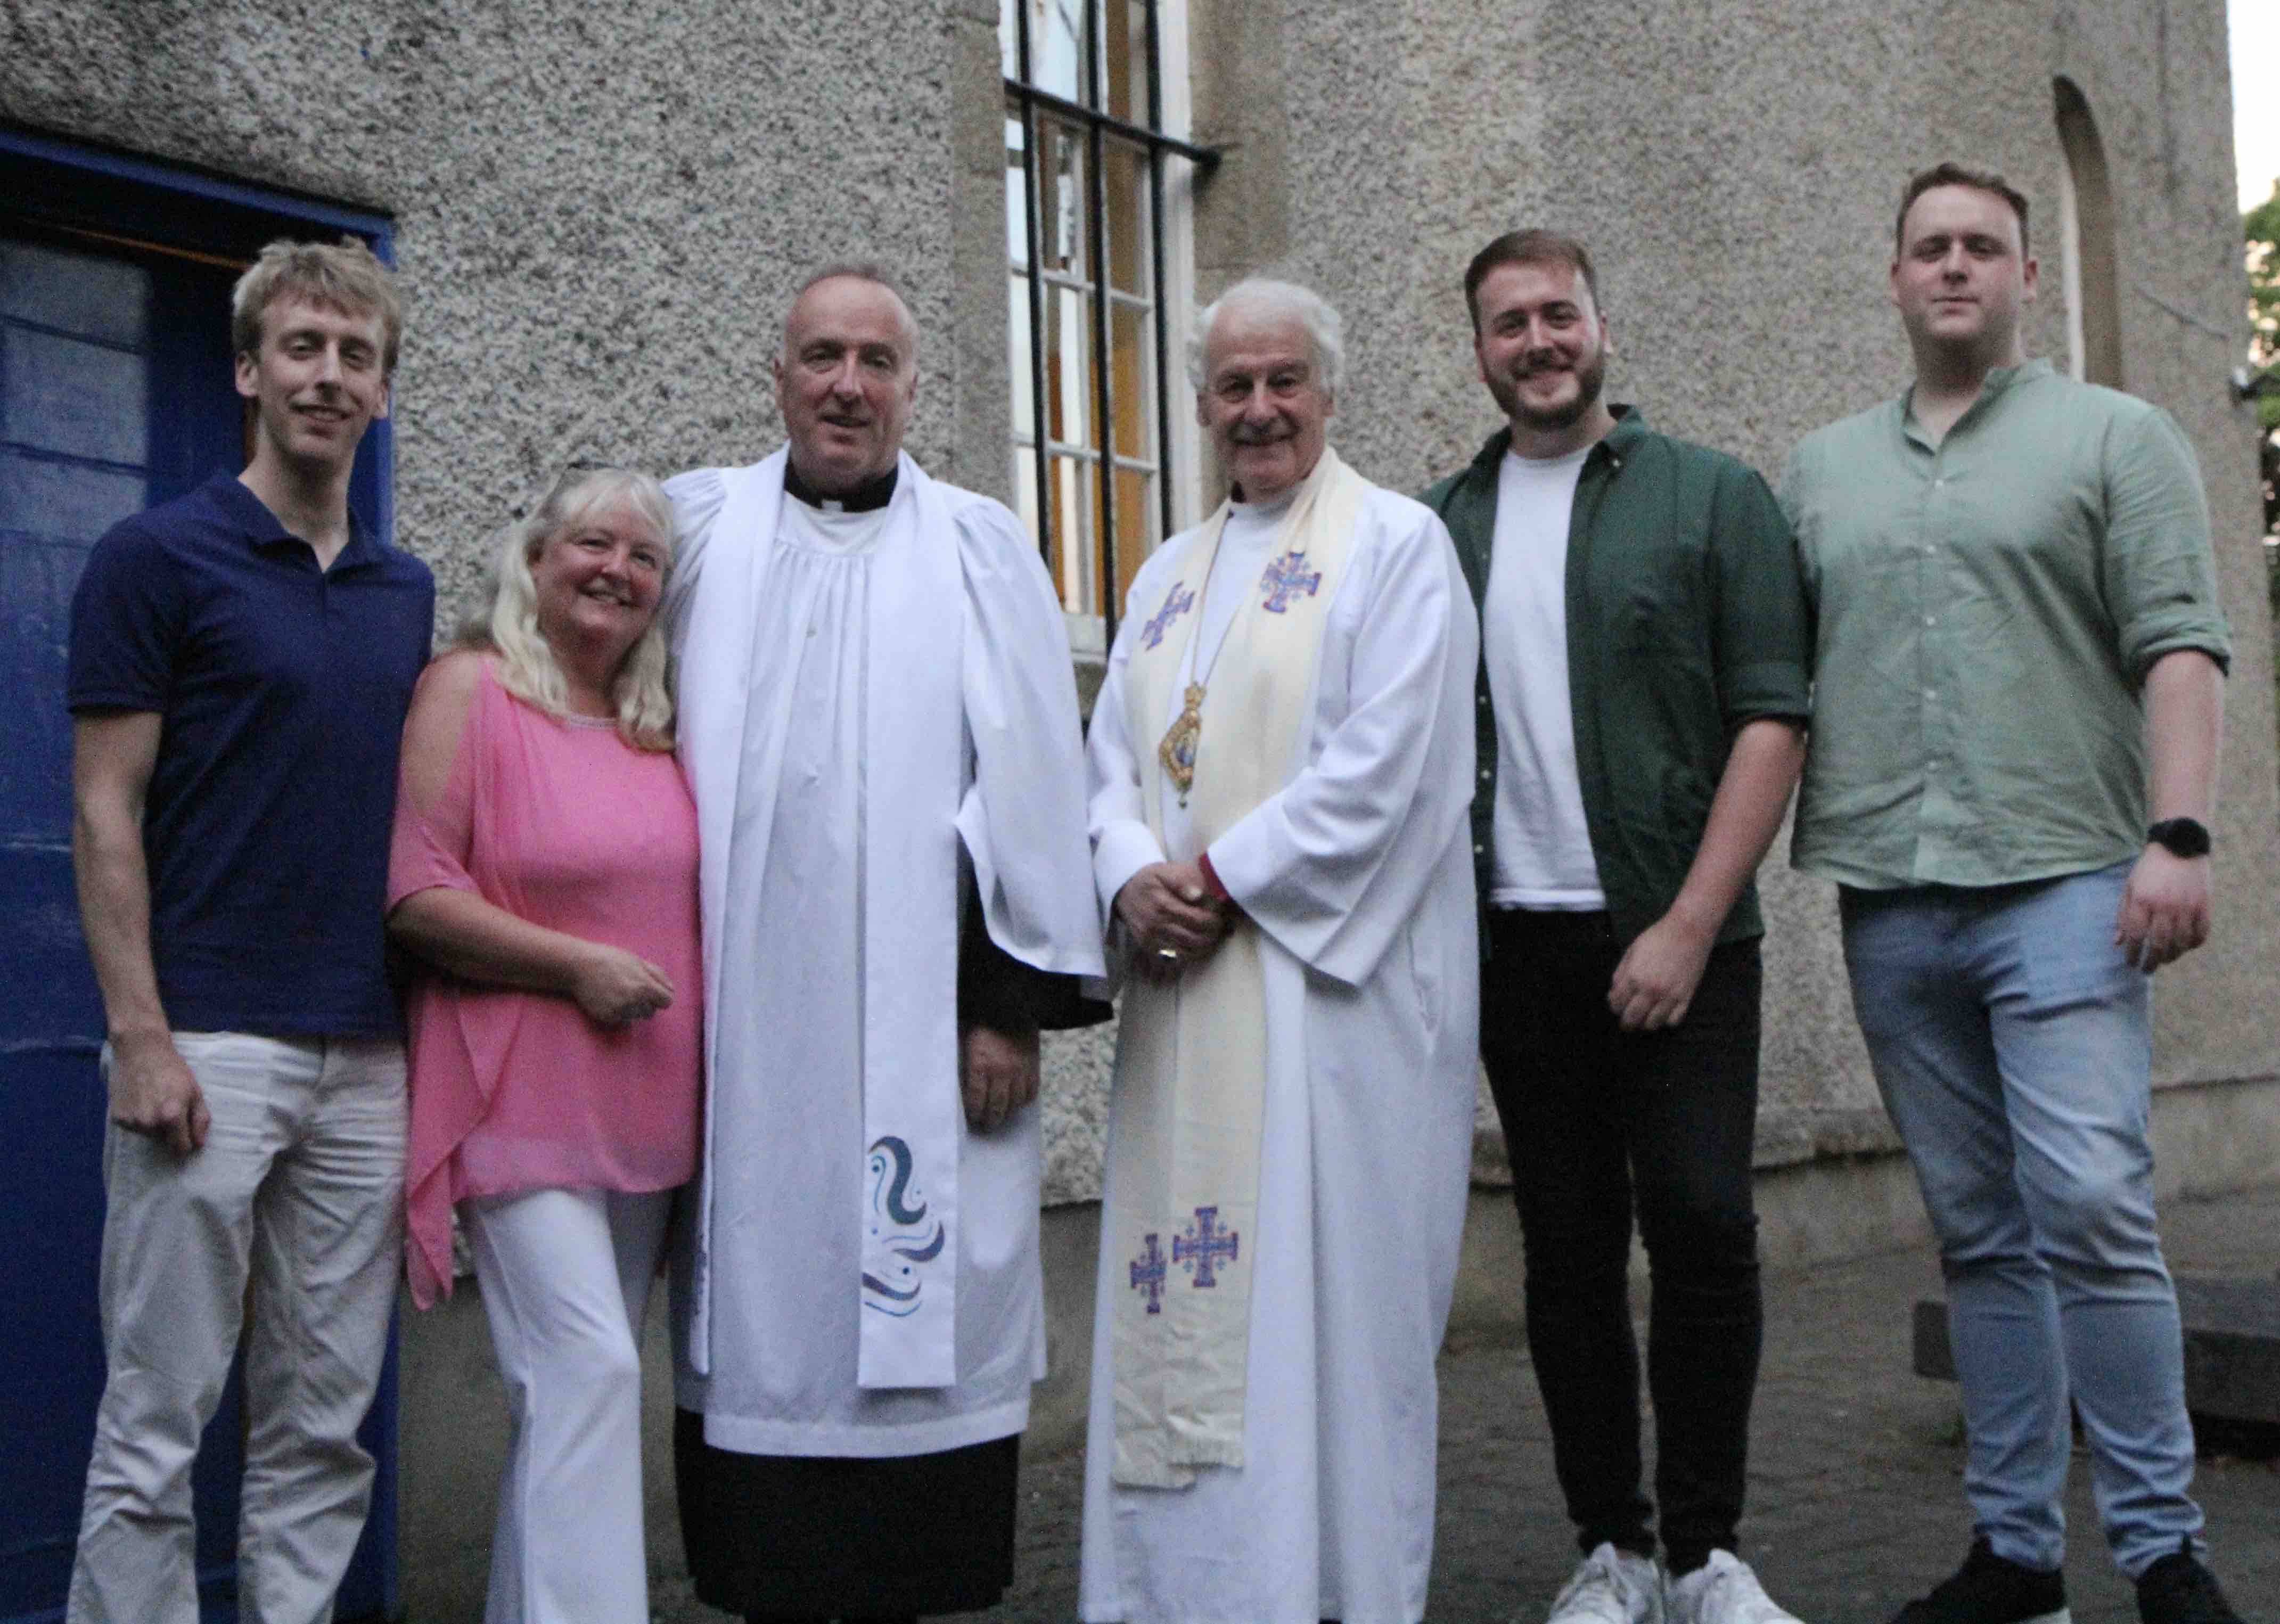 Kevin and Olive with their sons Shane, Cathal and Cian and Archbishop Michael Jackson.